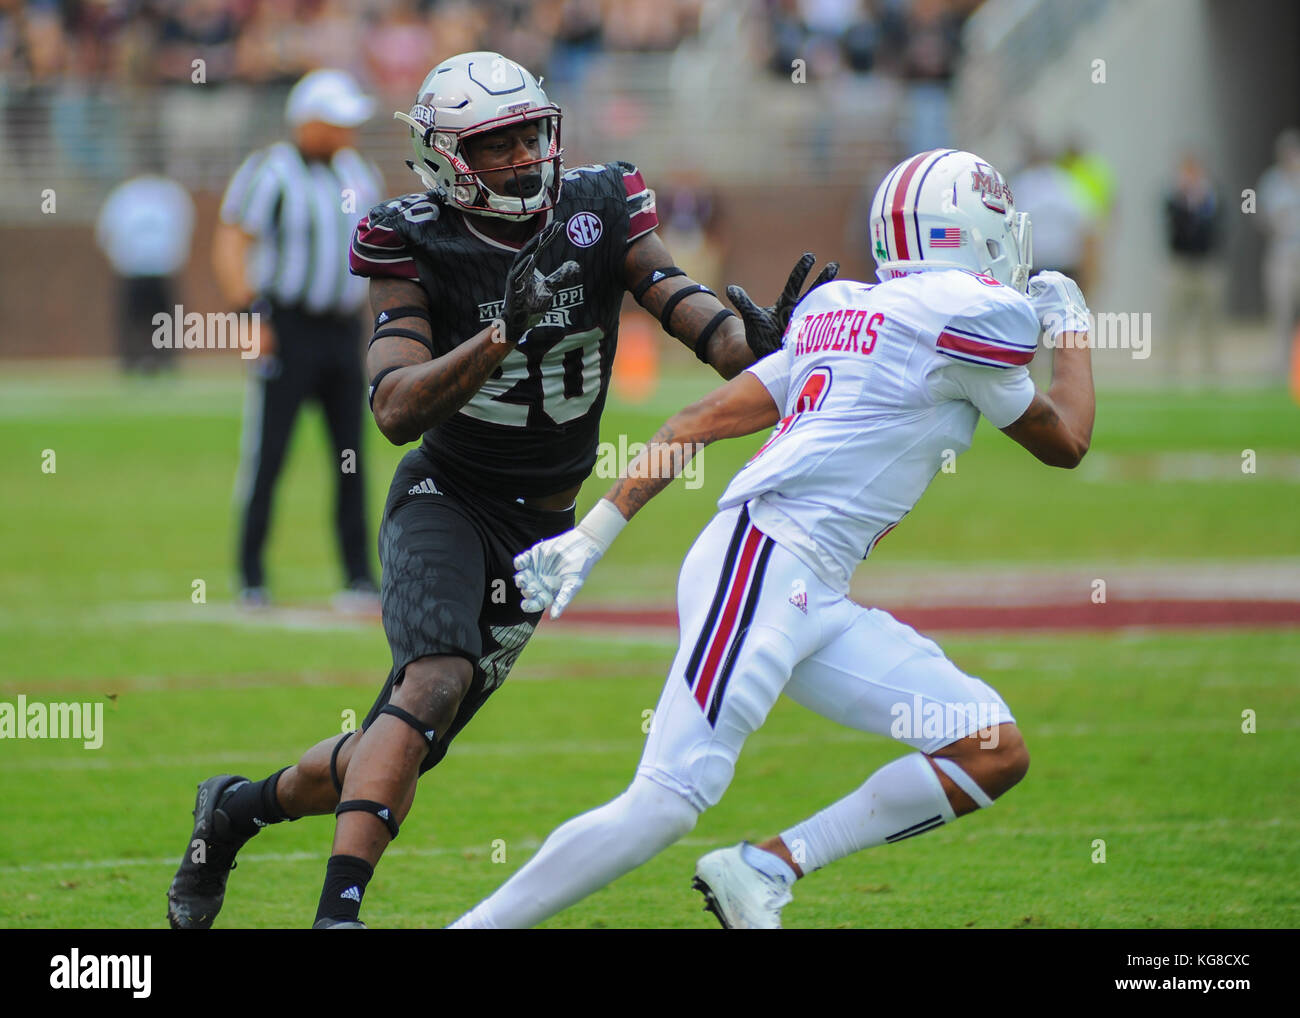 Starkville MS, USA. 14th Oct, 2017. TN, USA; MSU lineman, REGGIE TODD (20), and UMass CB, ISAIAH RODGERS (9), in NCAA D1 action in Starkville MS. The Bulldogs defeated the UMass Minuteman 34-23. Kevin Langley/CSM/Alamy Live News Stock Photo